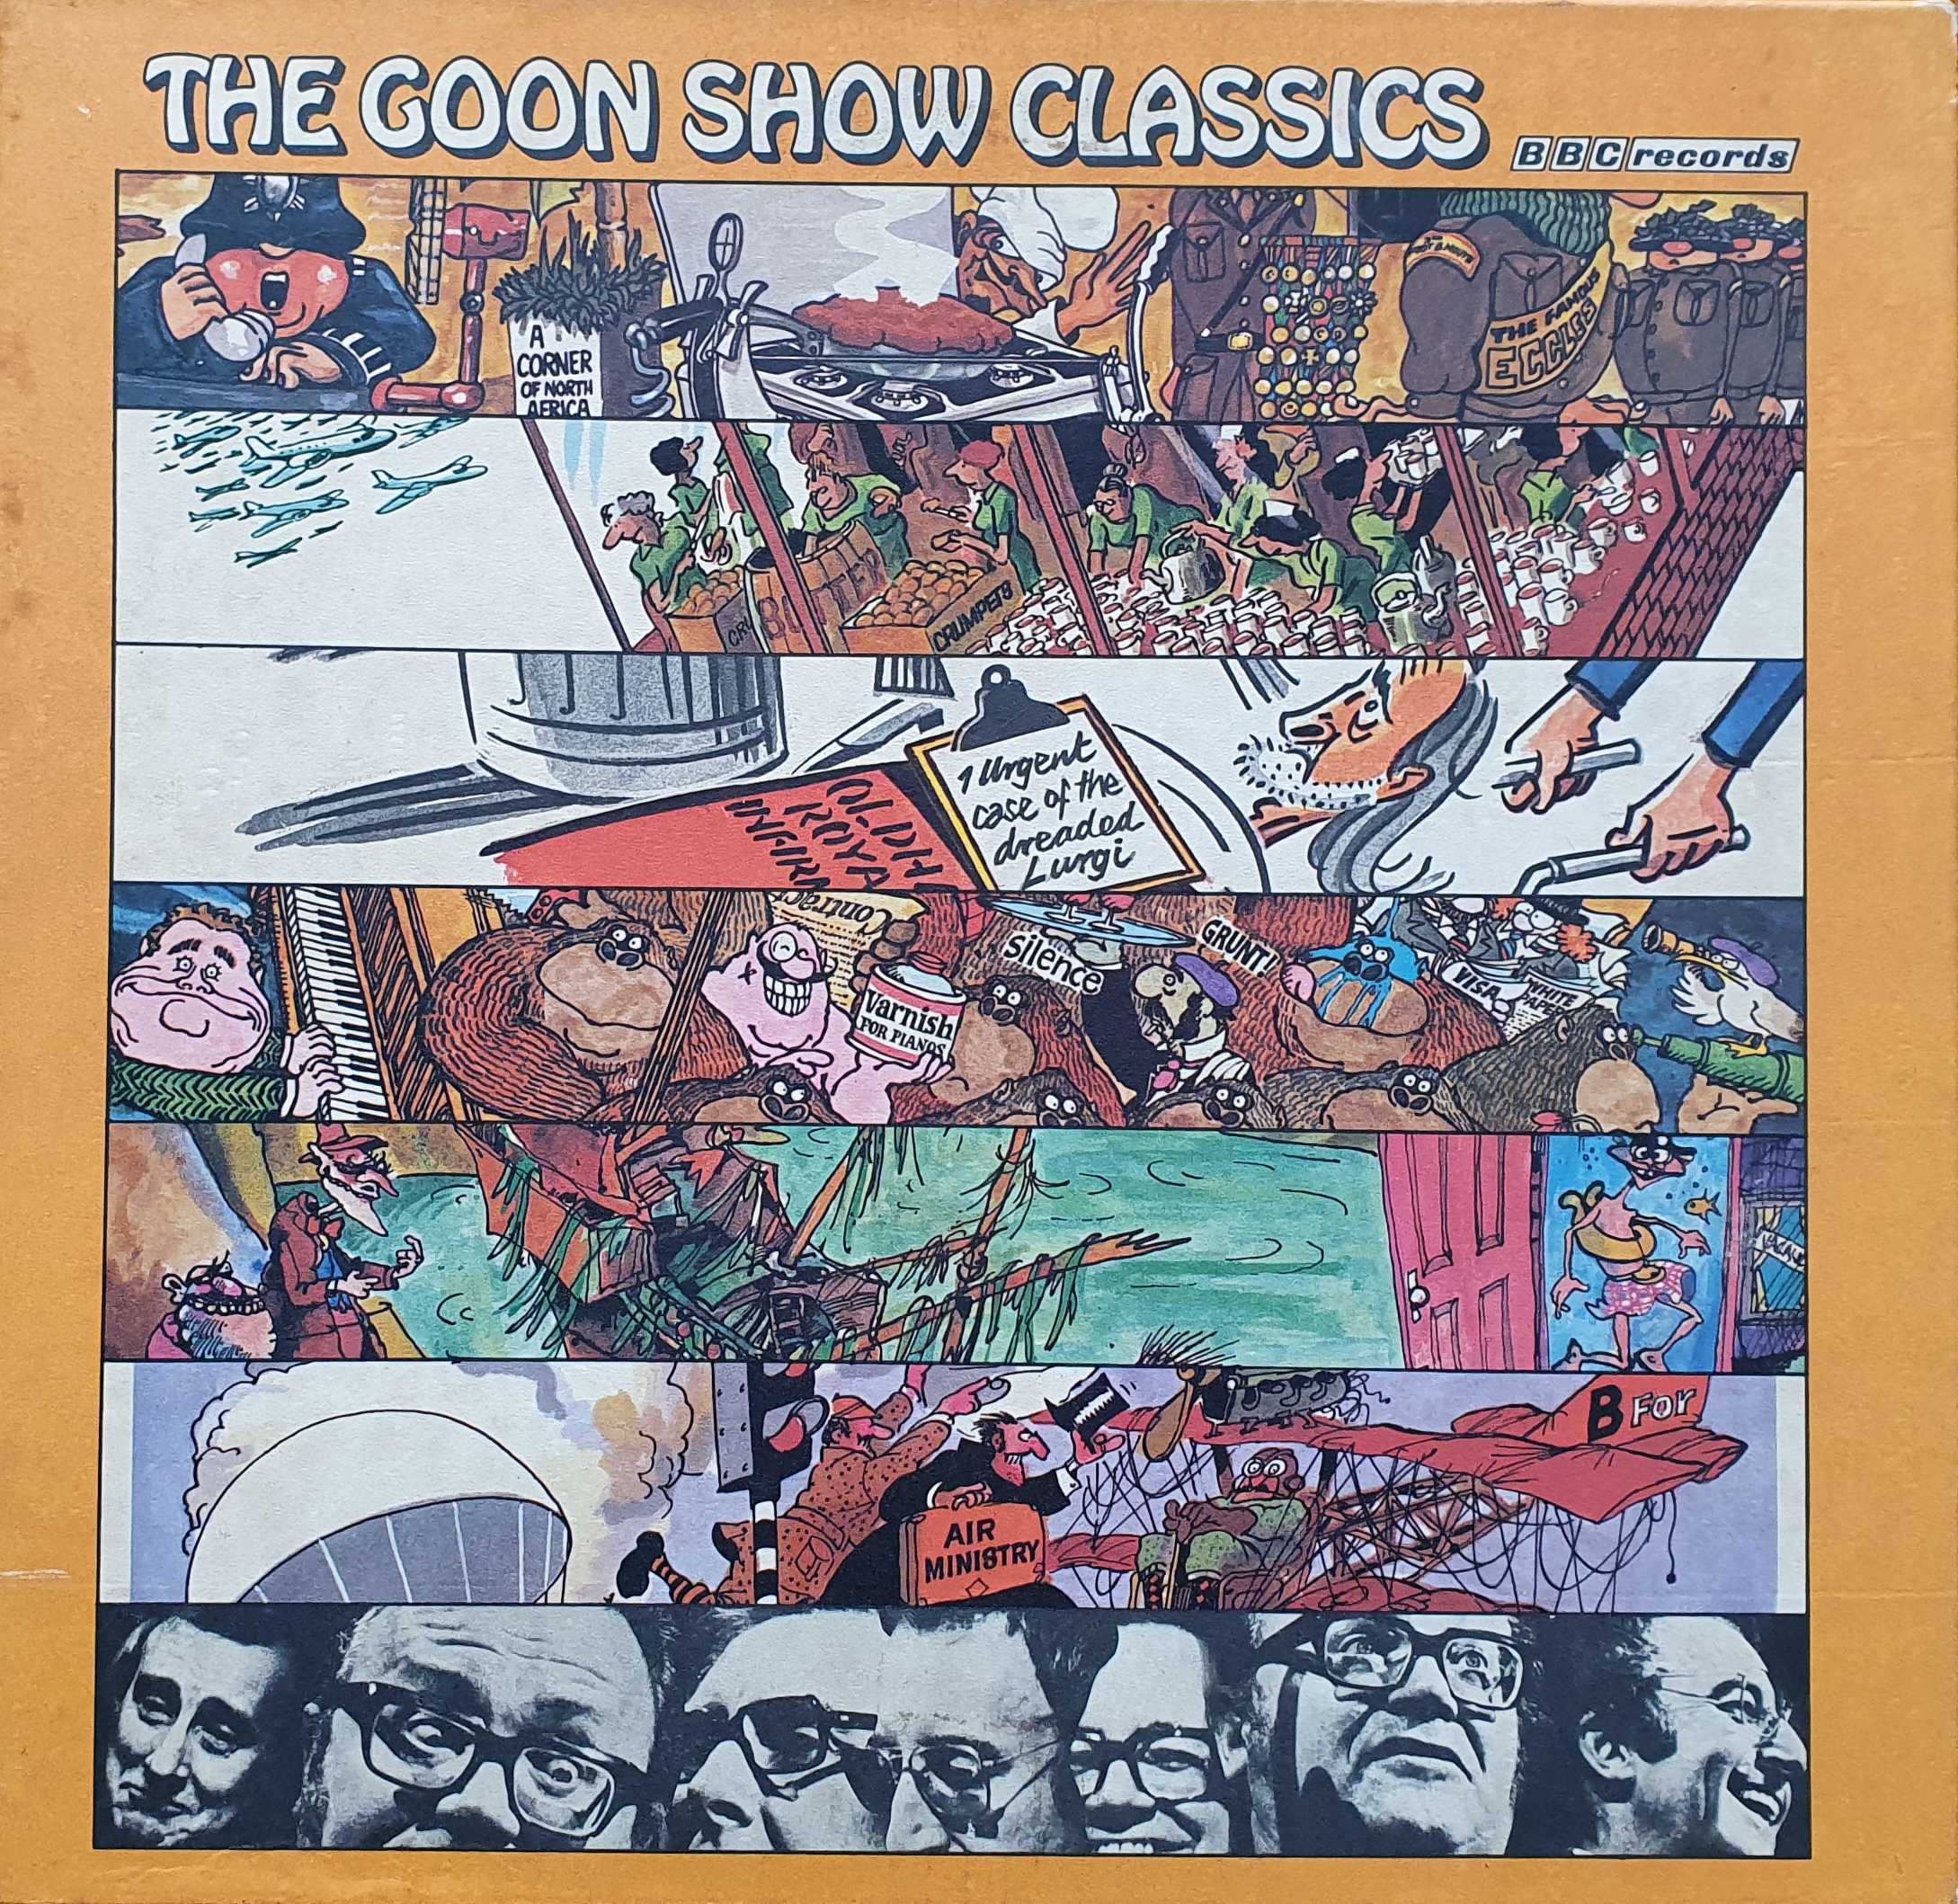 Picture of 2660 127 The Goon Show classics by artist The Goons from the BBC albums - Records and Tapes library